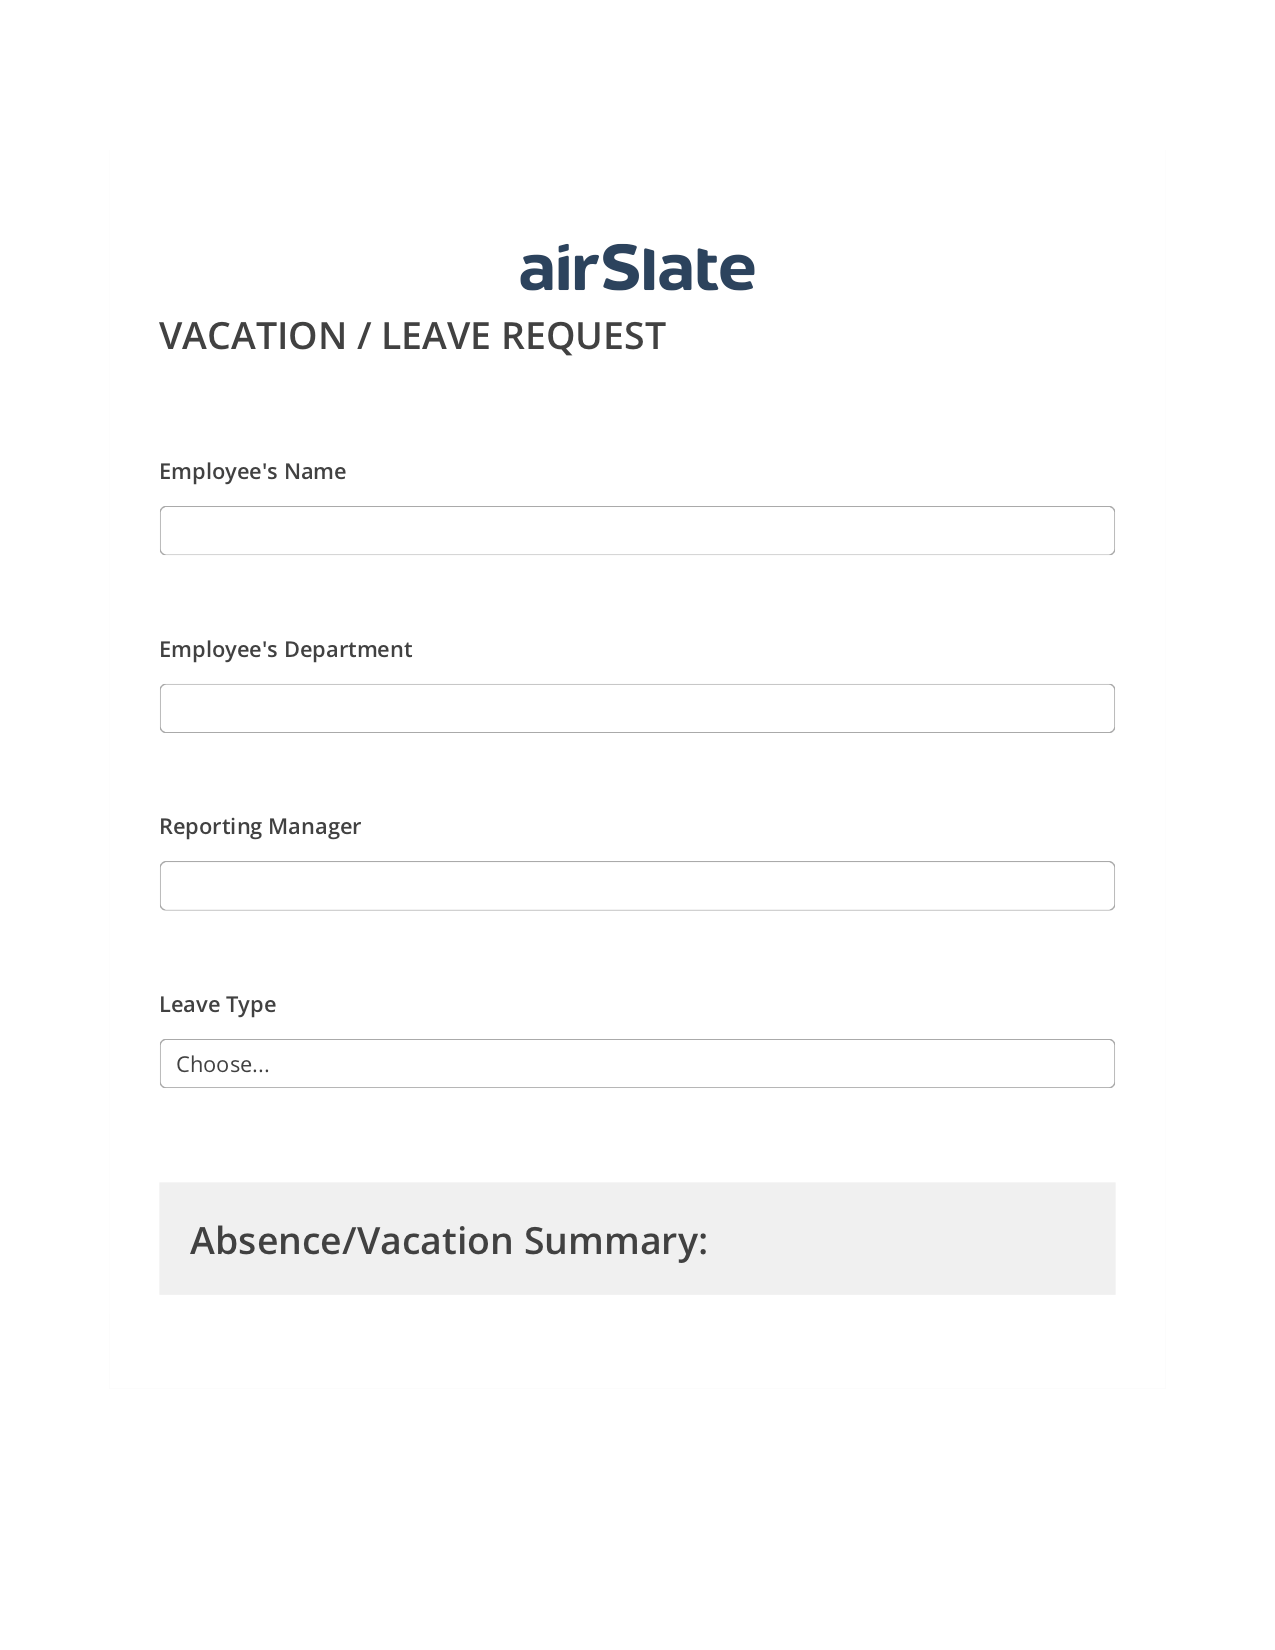 Vacation/Leave Request Workflow Pre-fill from MS Dynamics 365 Records, Remove Slate Bot, Export to Excel 365 Bot